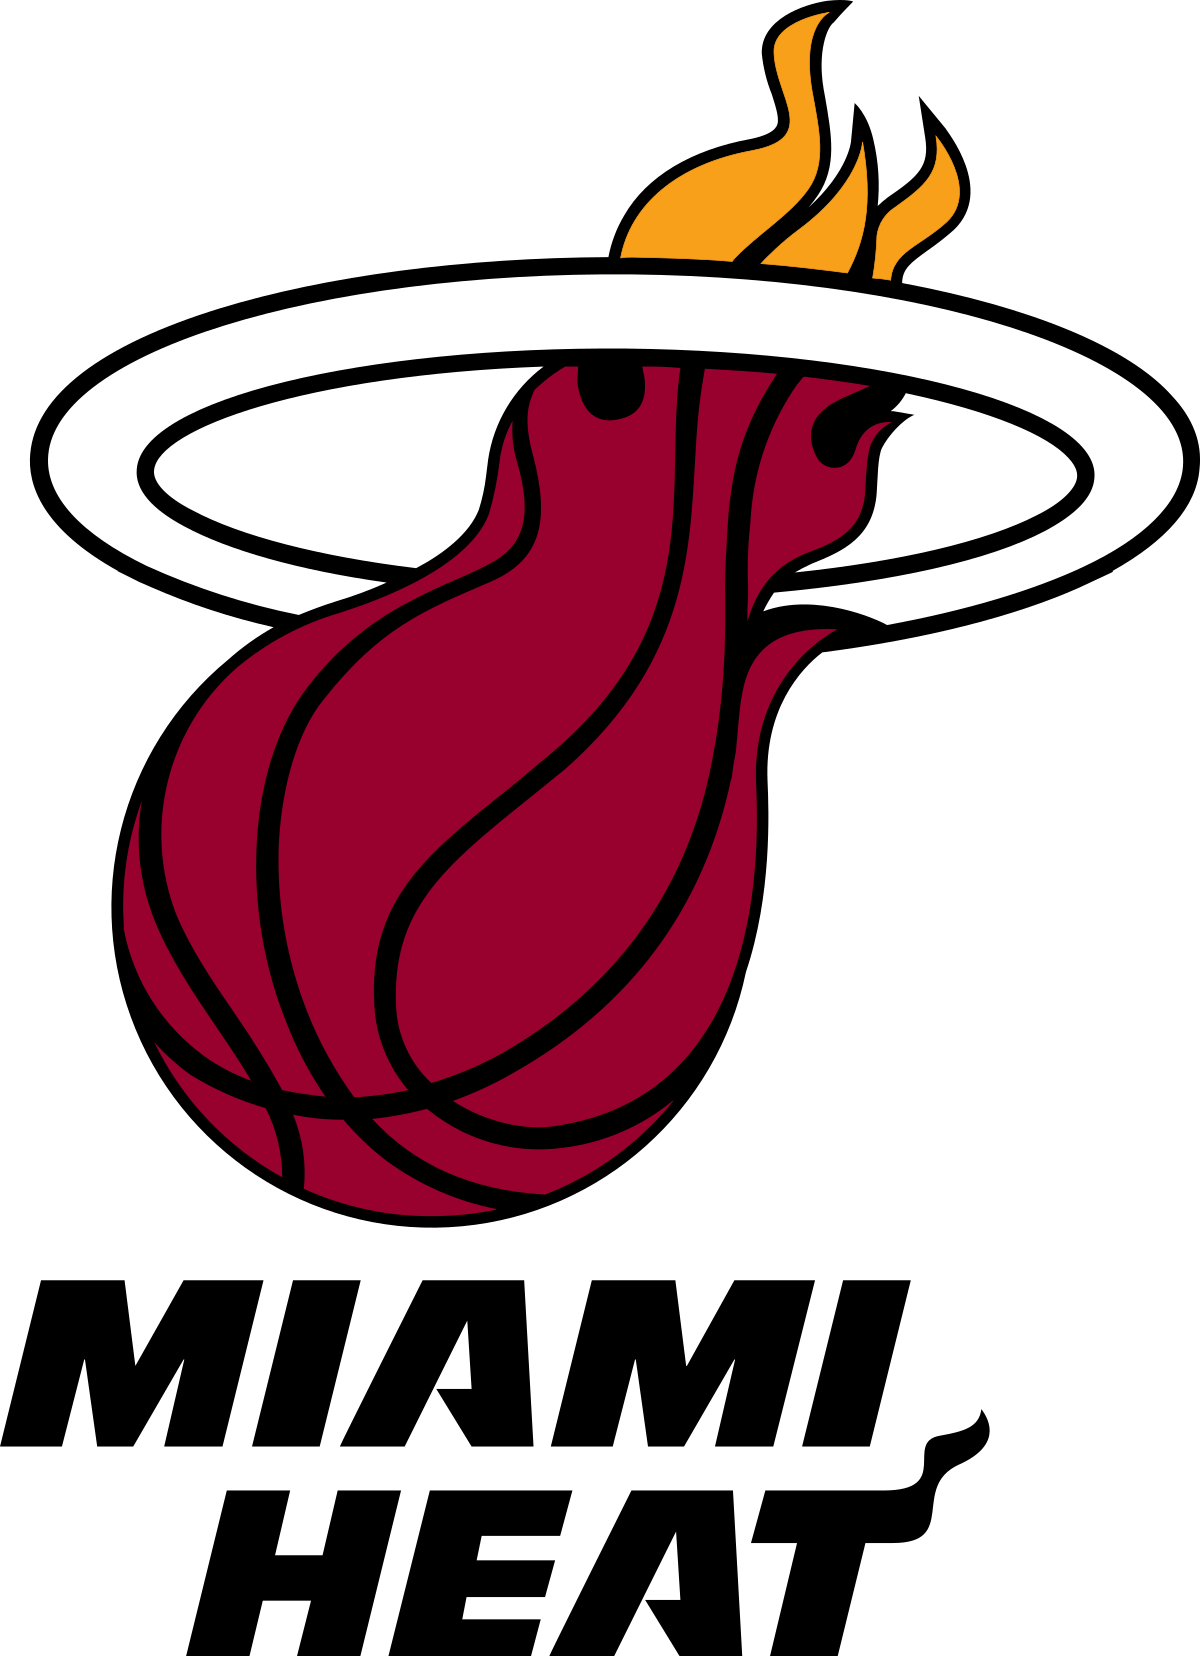 Red and Black Basketball Logo - Miami Heat